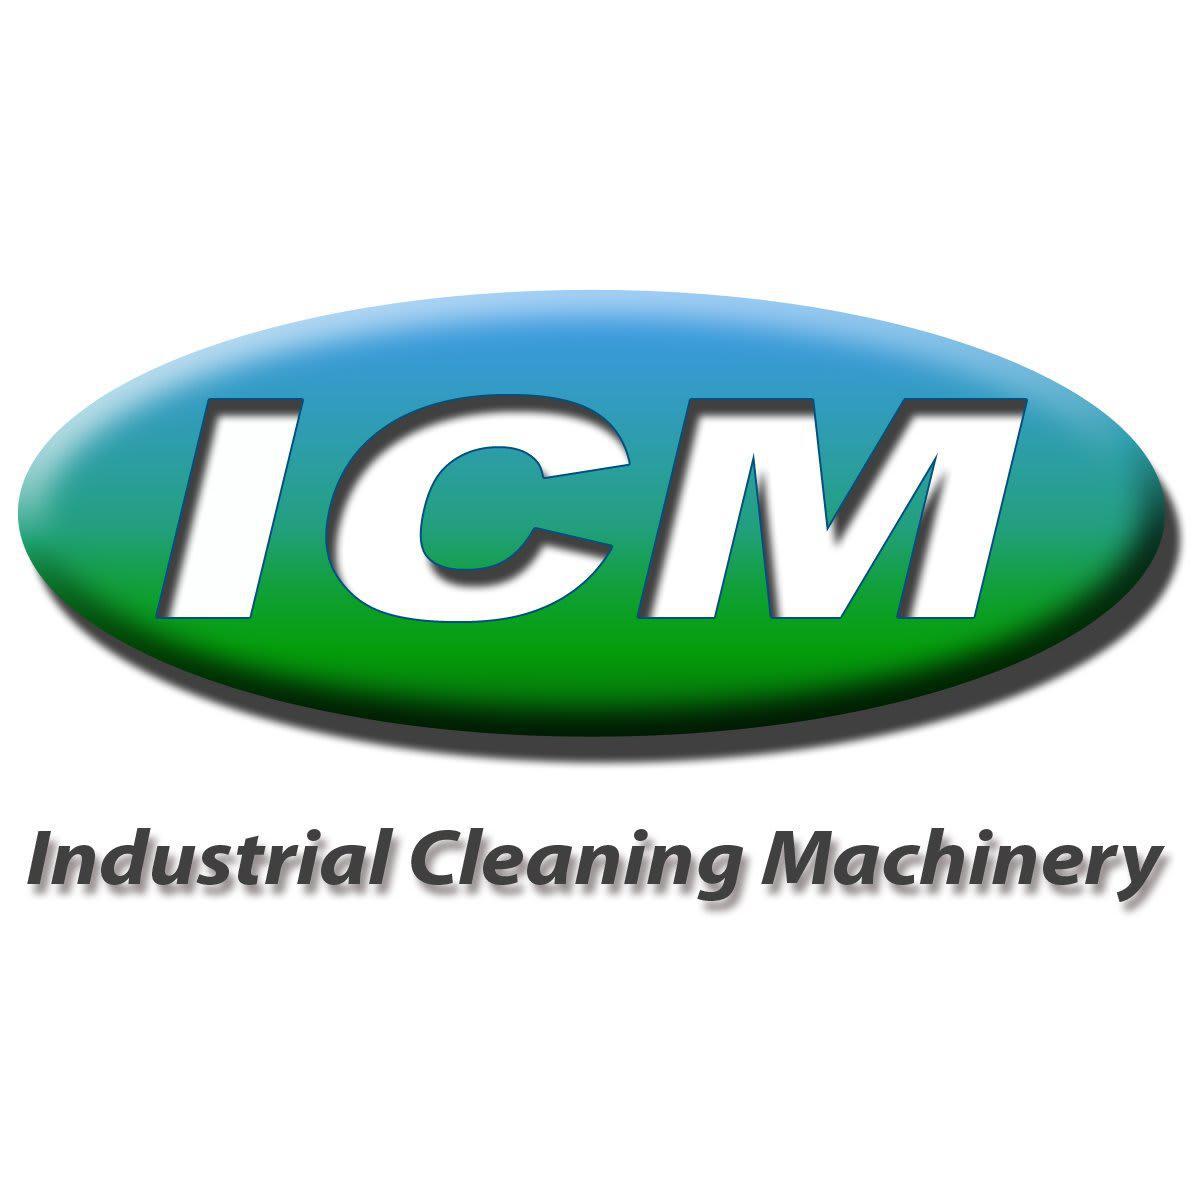 Industrial Cleaning Machinery UK Ltd - Leeds, West Yorkshire LS11 5UU - 01132 721699 | ShowMeLocal.com